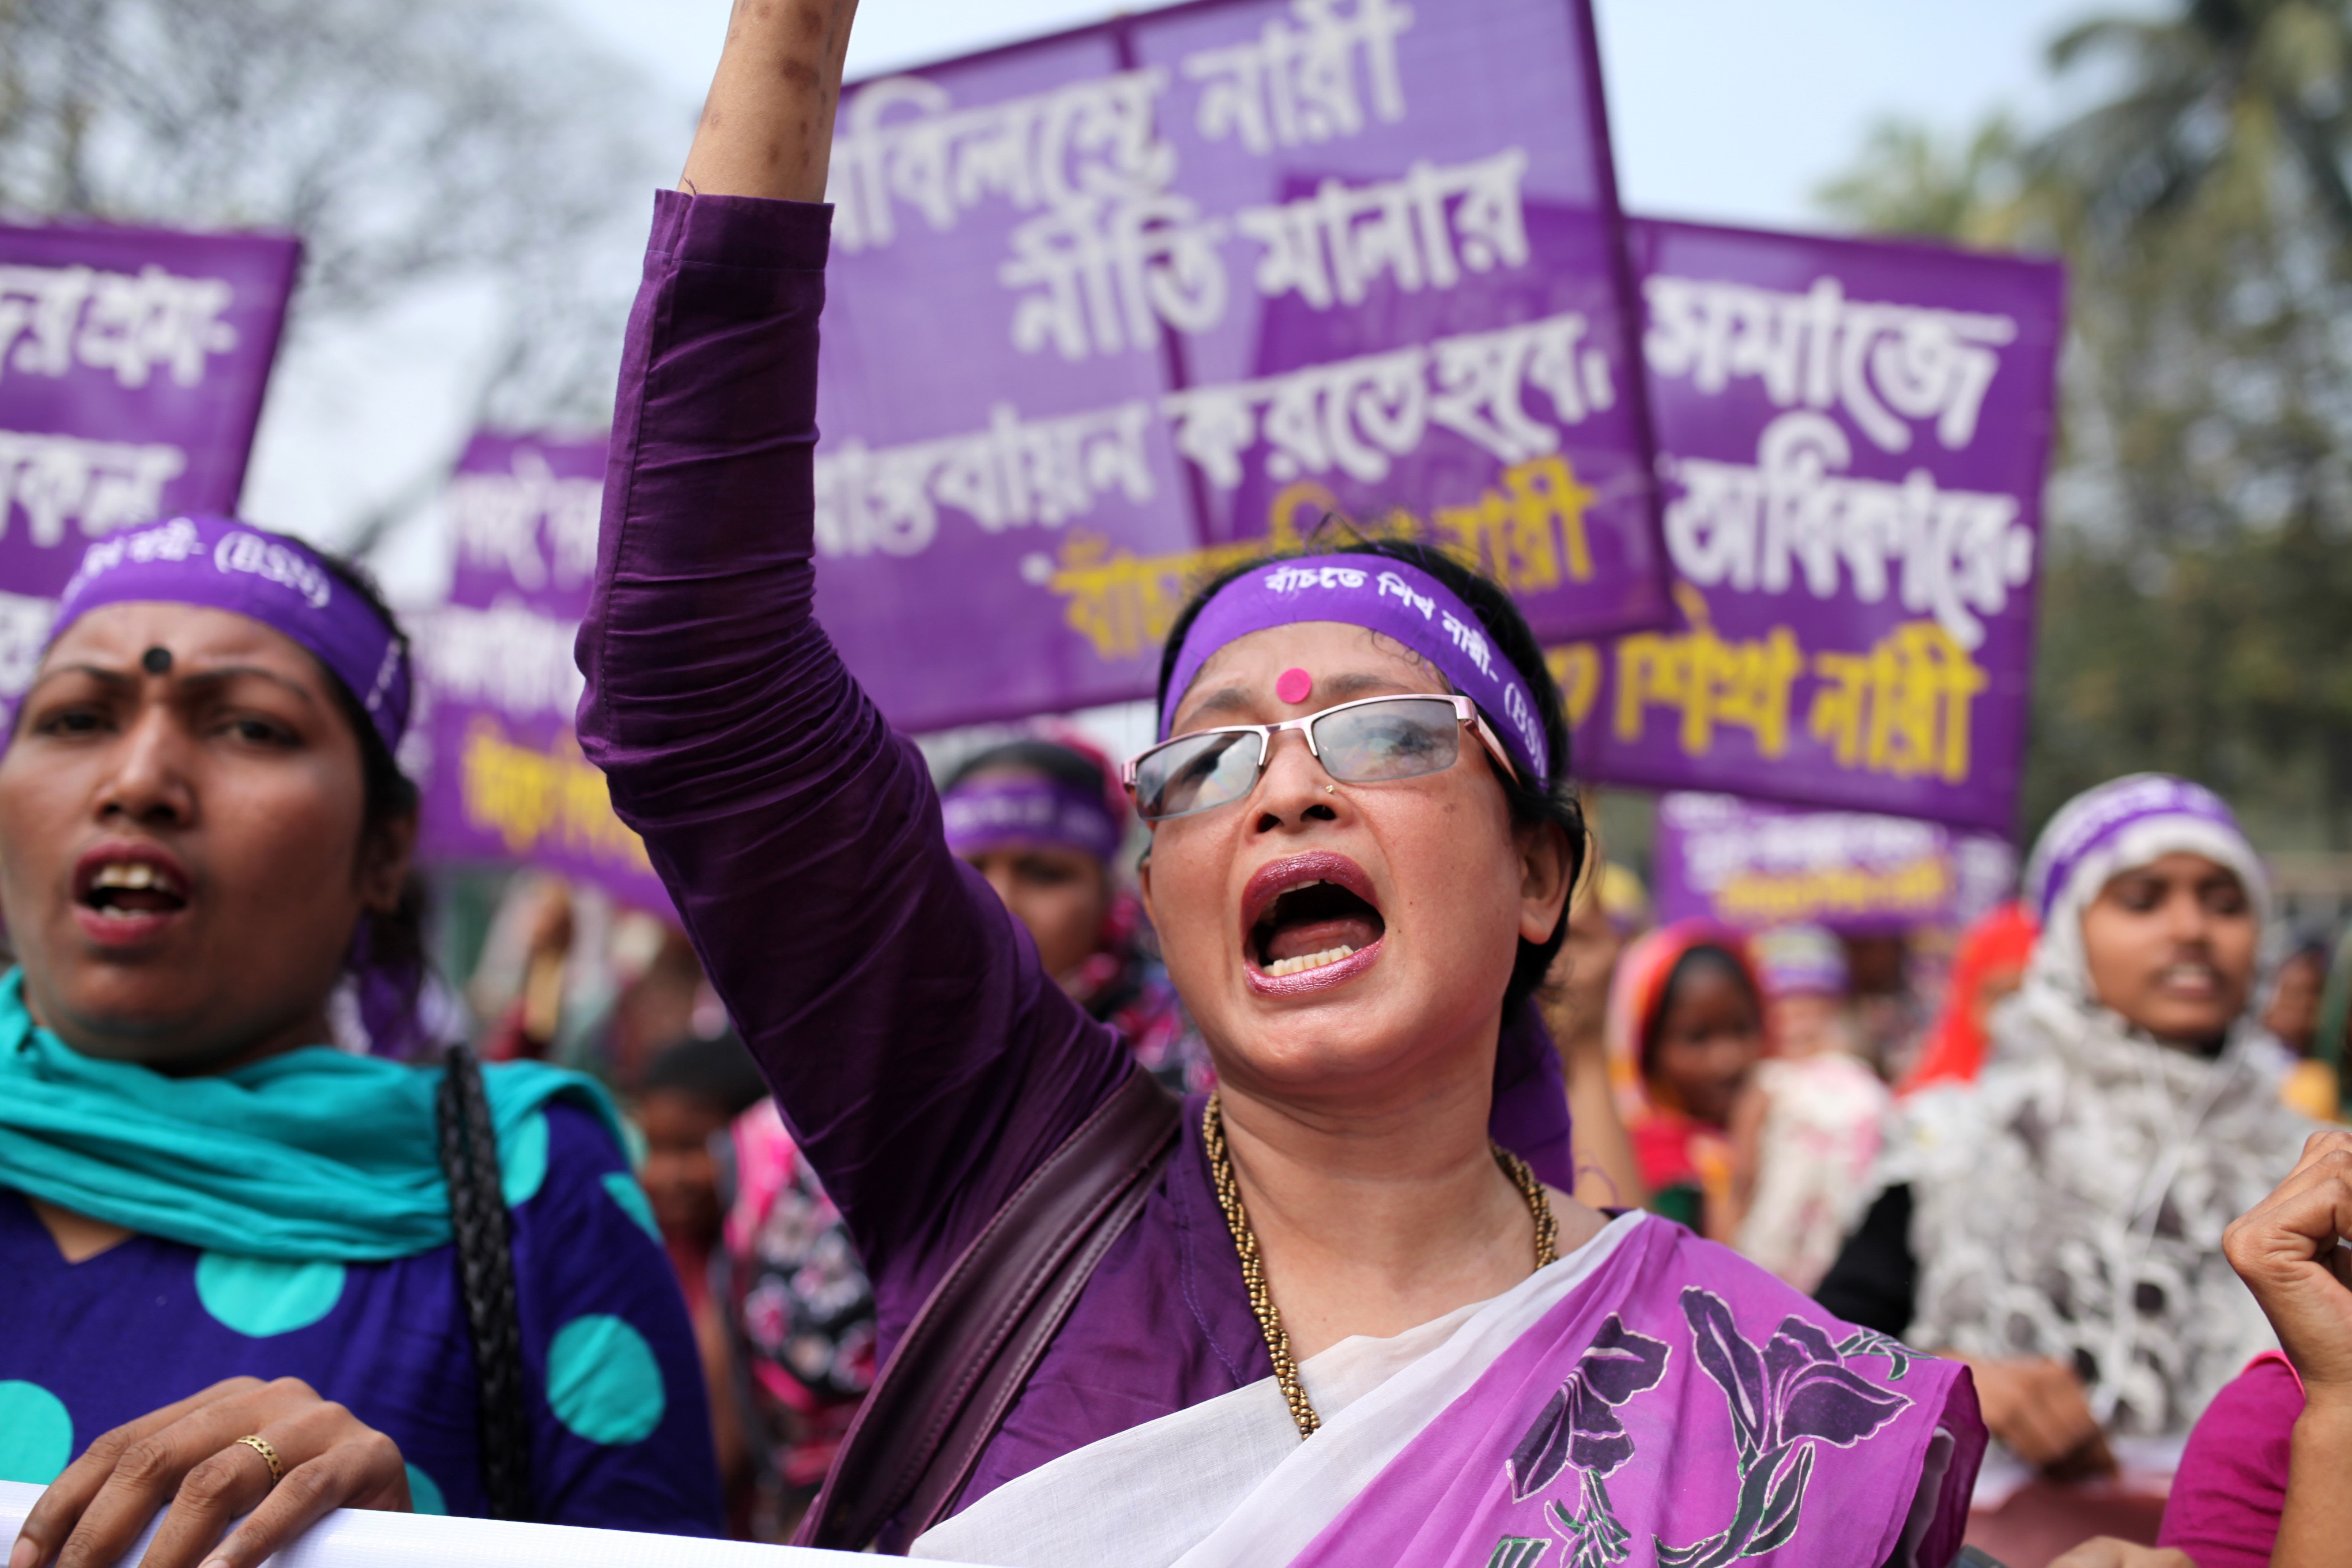 Bangladeshi activists and garment workers attend a rally in front of National Press Club during International Women's Day in Dhaka, Bangladesh on March 08, 2016.